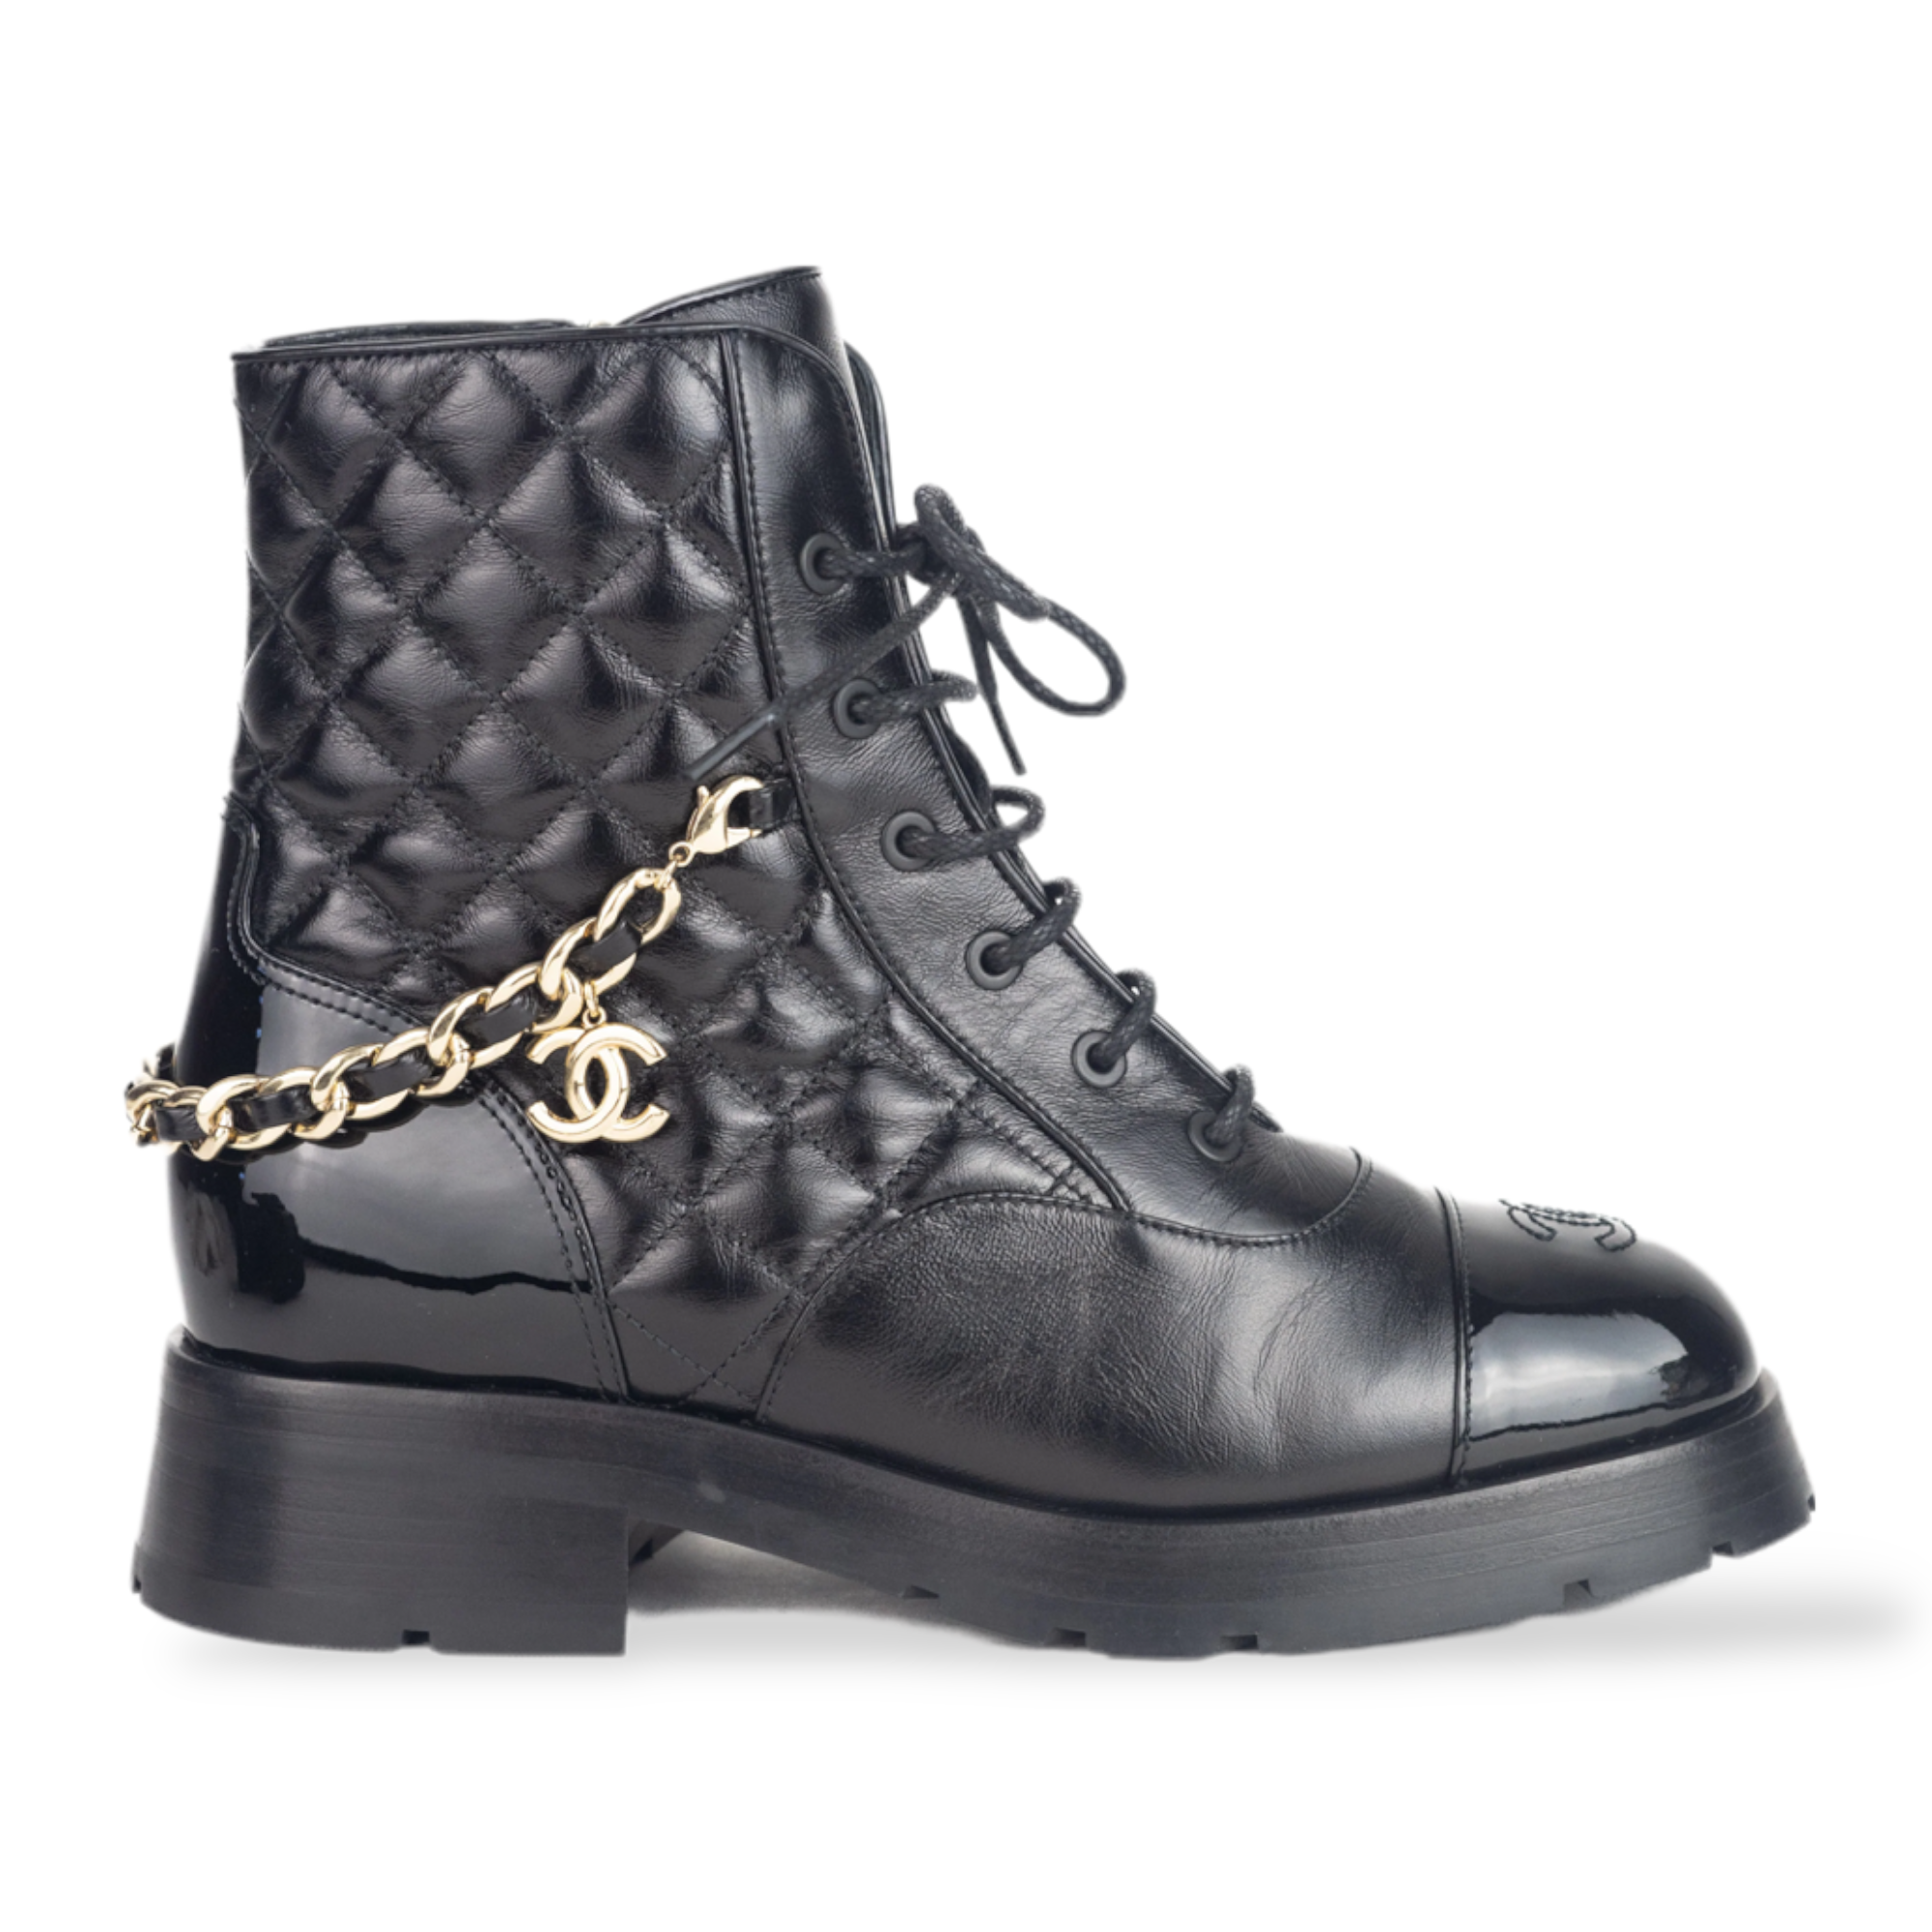 Chanel Boots in black and white - Gem